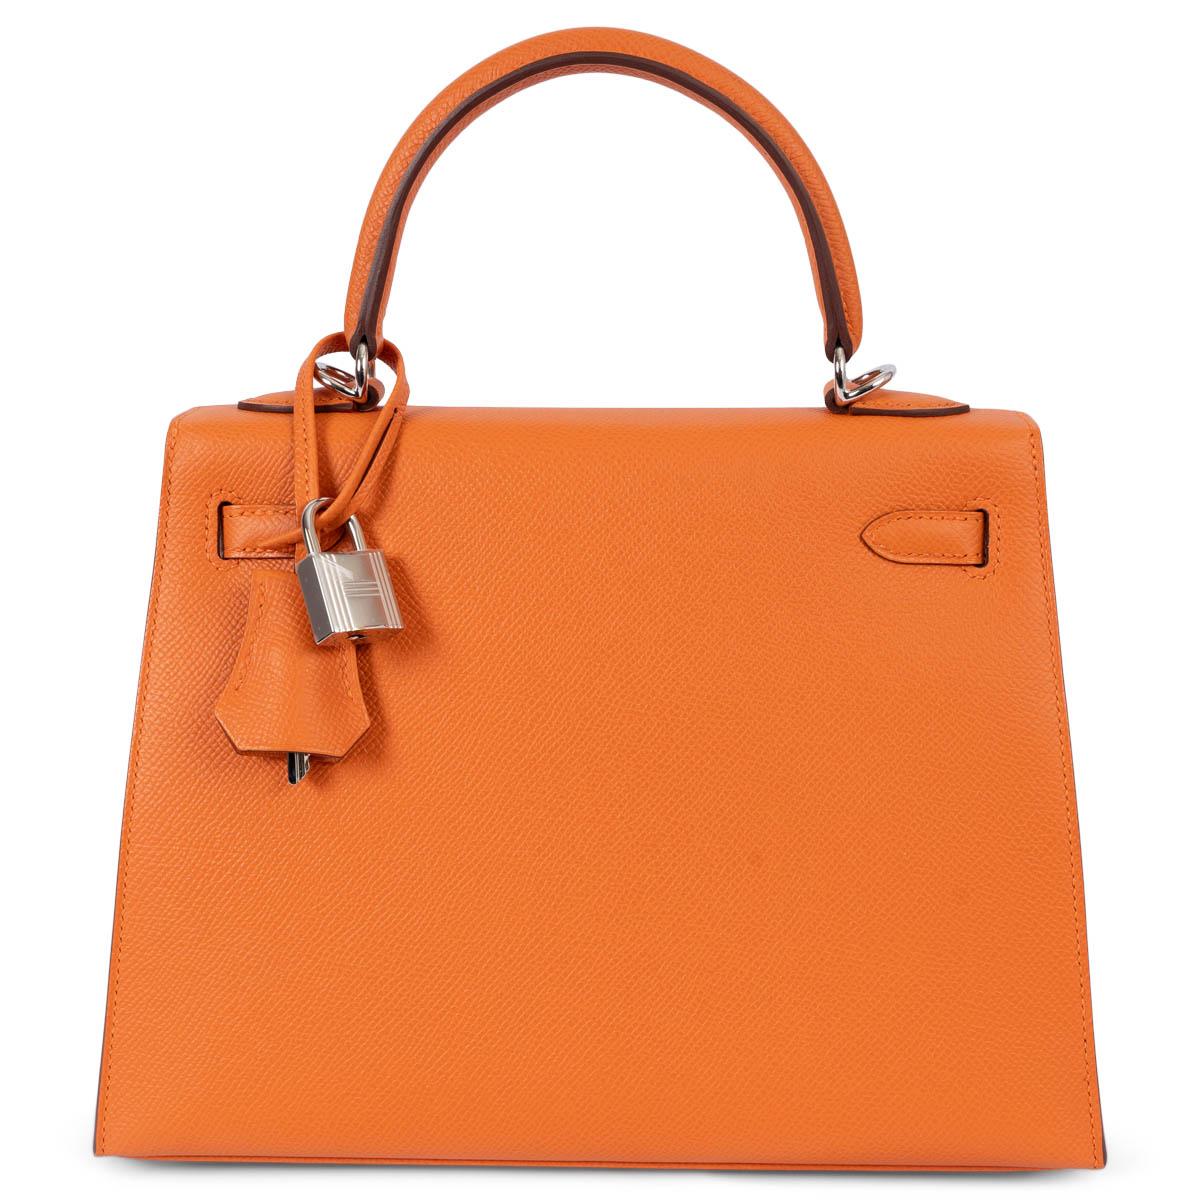 HERMES orange Epsom leather KELLY 25 SELLIER Bag Phw In New Condition For Sale In Zürich, CH